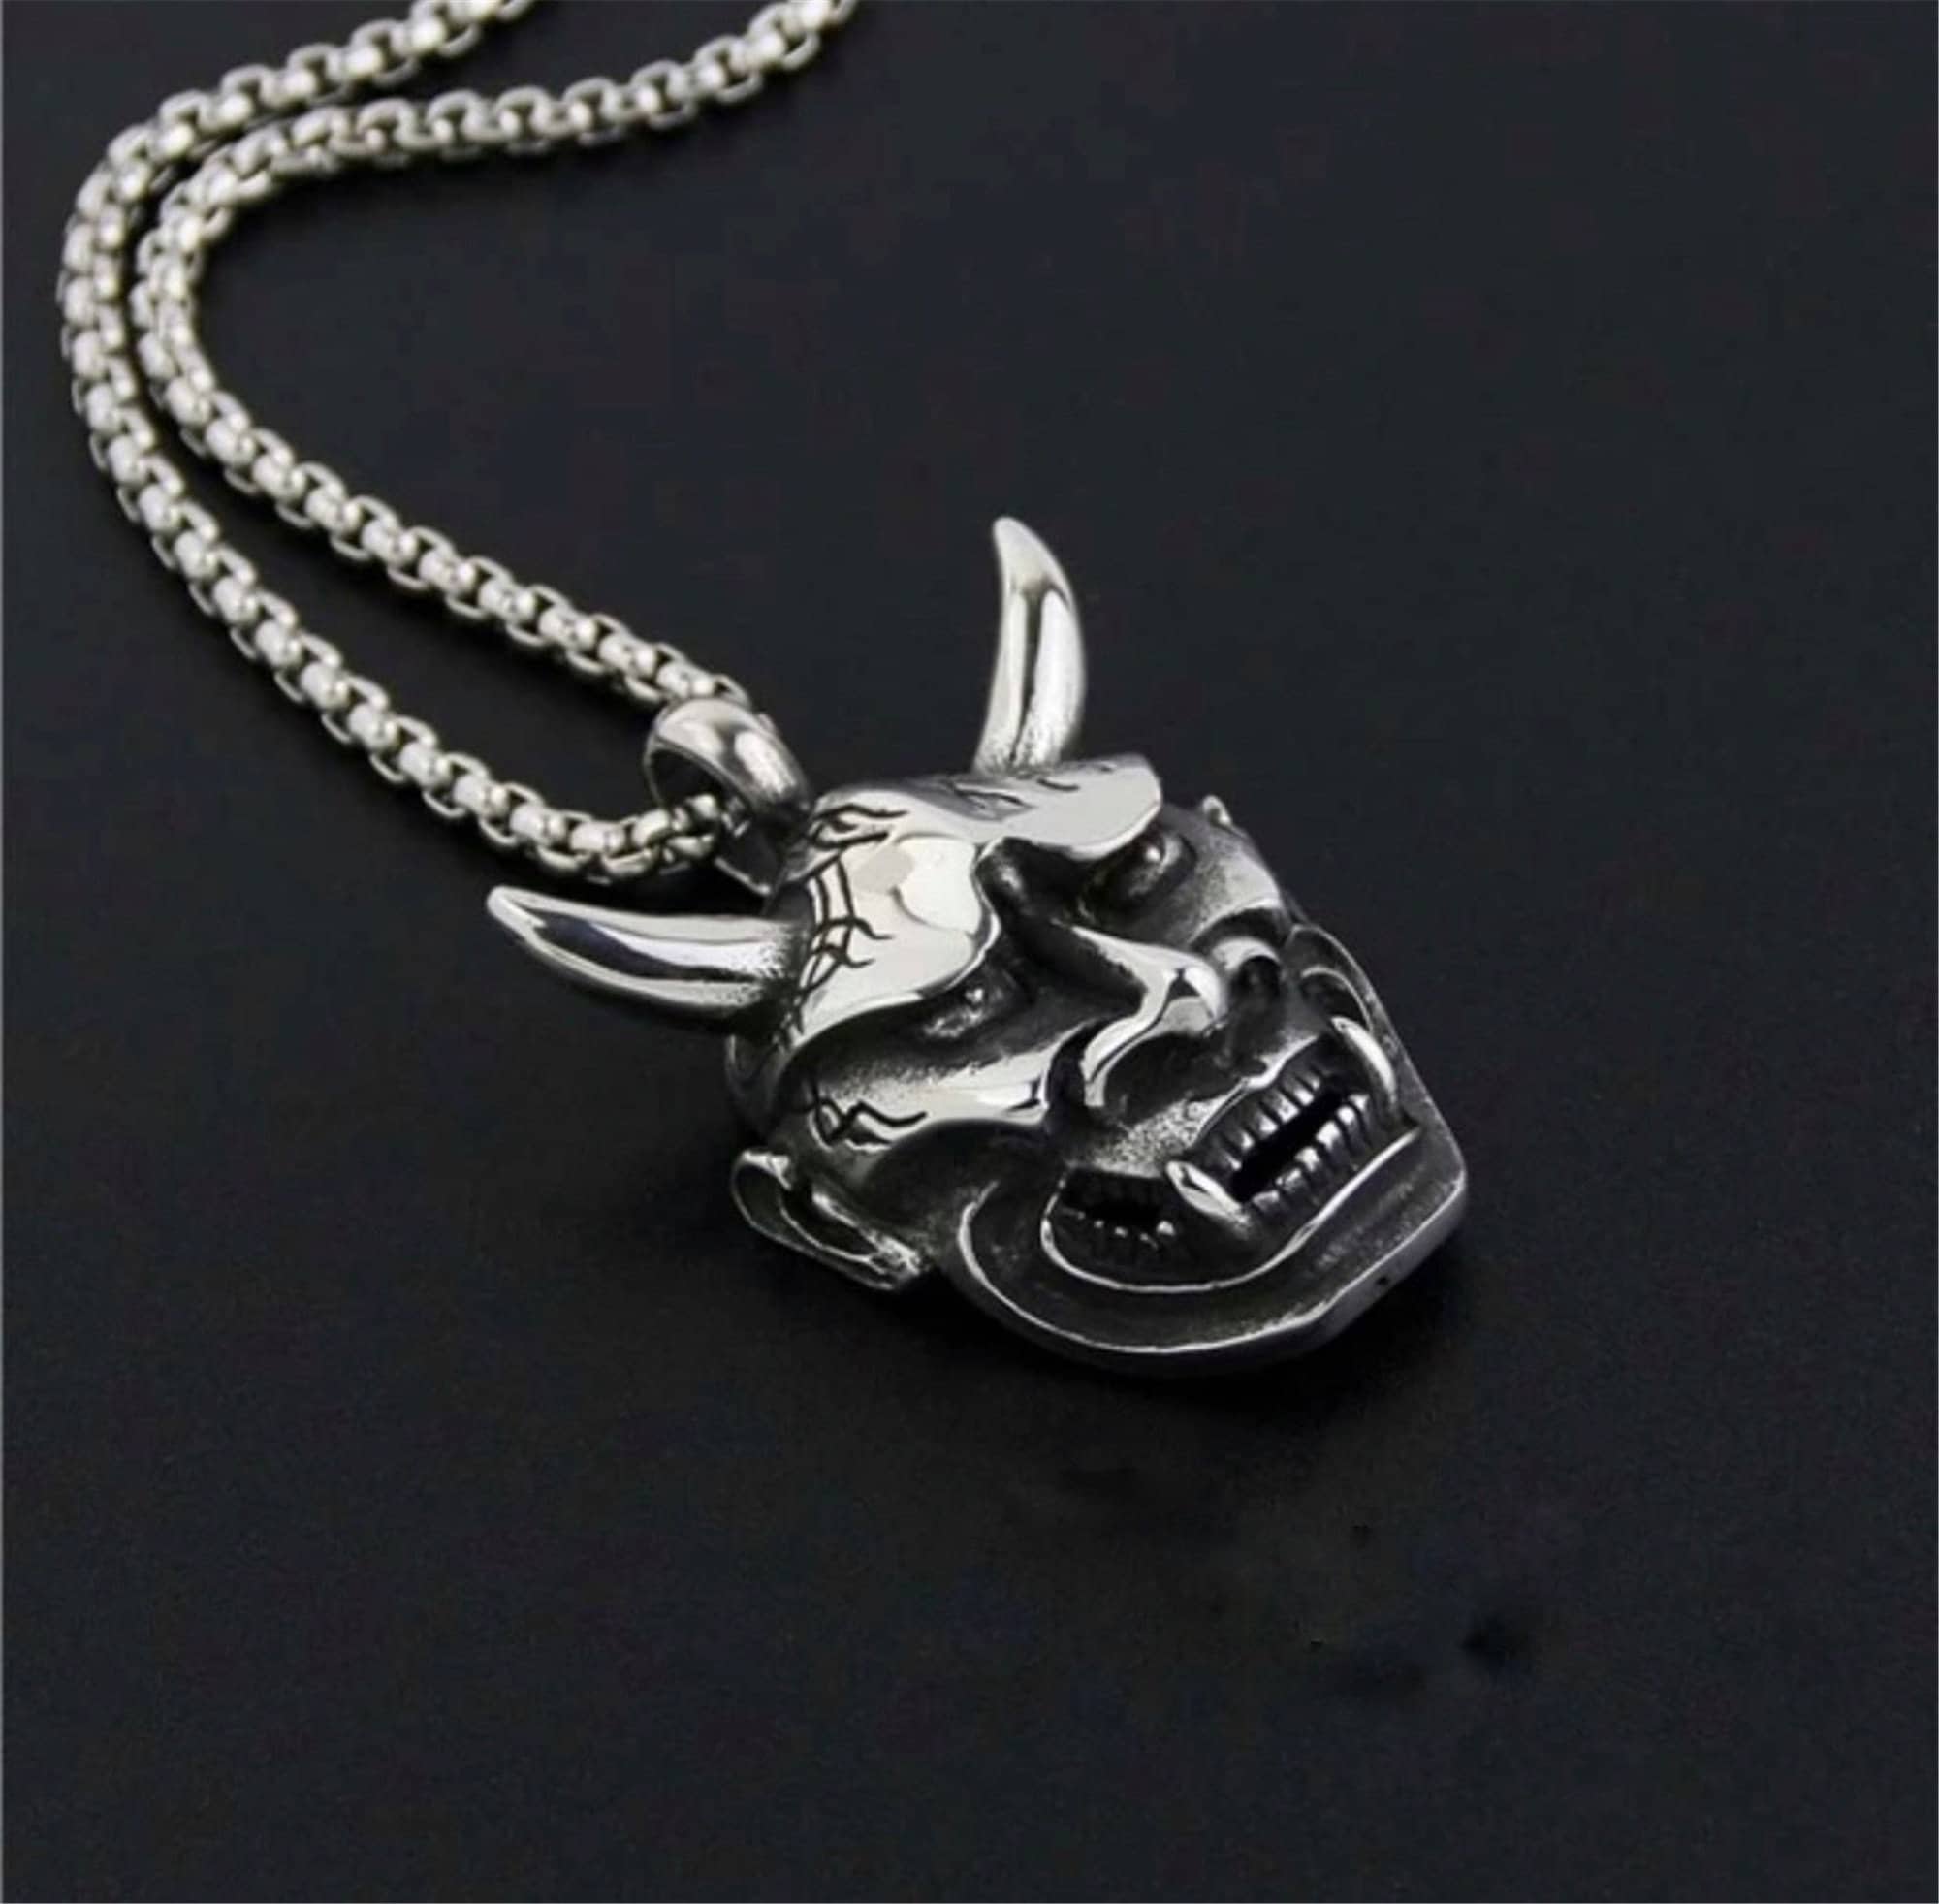 Hannya Oni Mask Stainless Steel Pendant Necklace | Etsy